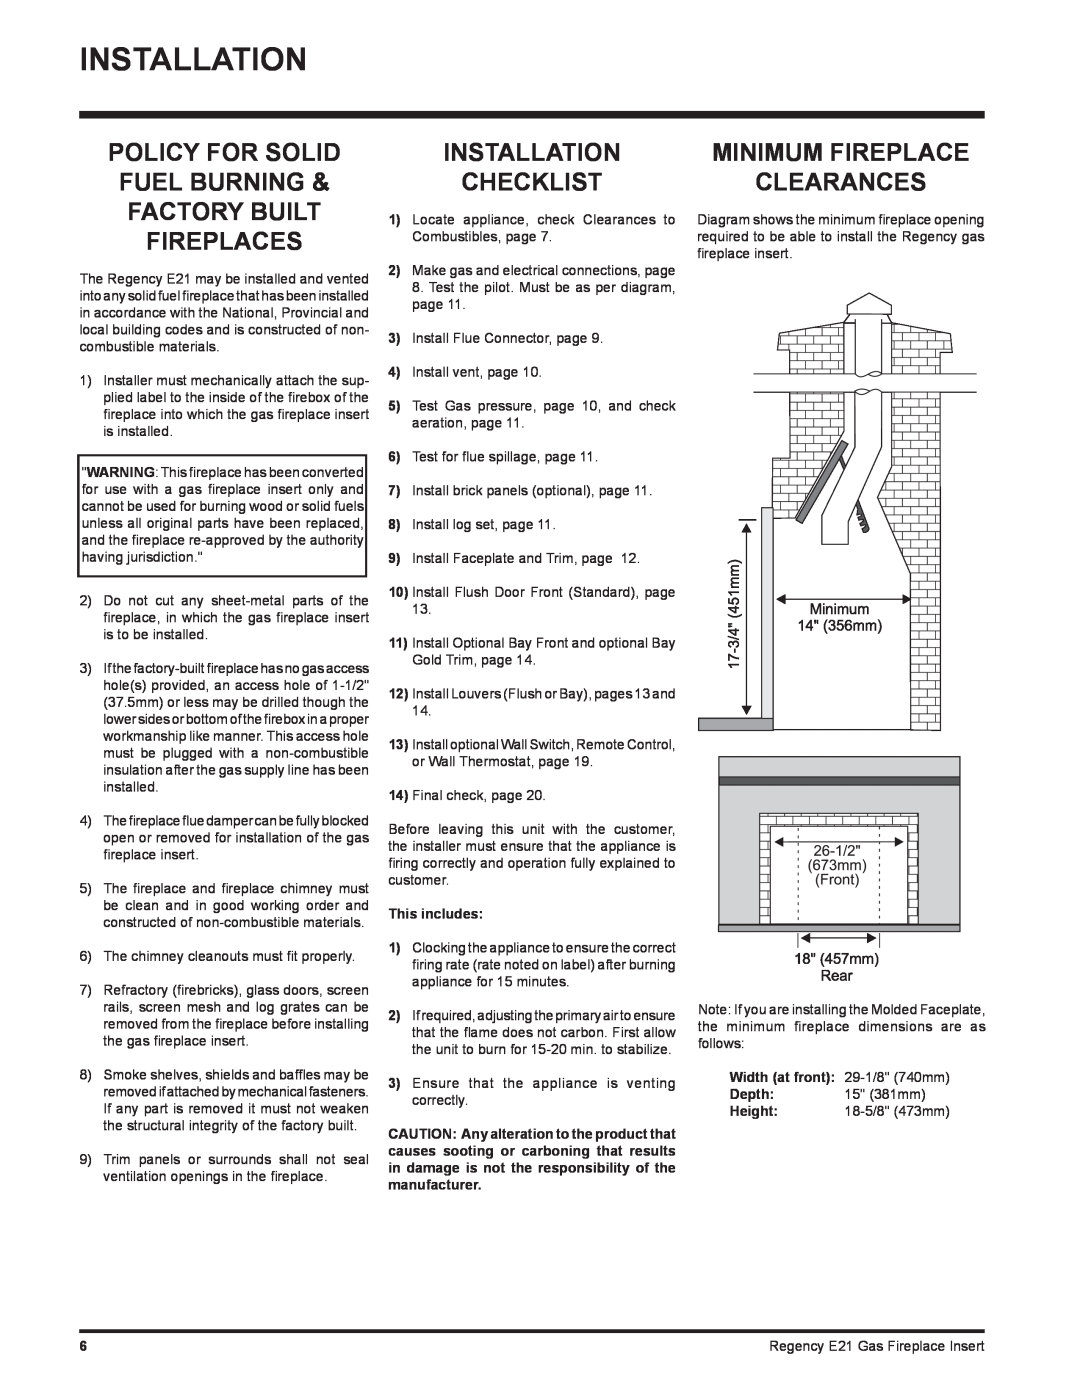 Regency E21-LP1 Installation Checklist, Minimum Fireplace Clearances, This includes, Width at front, Depth, Height 